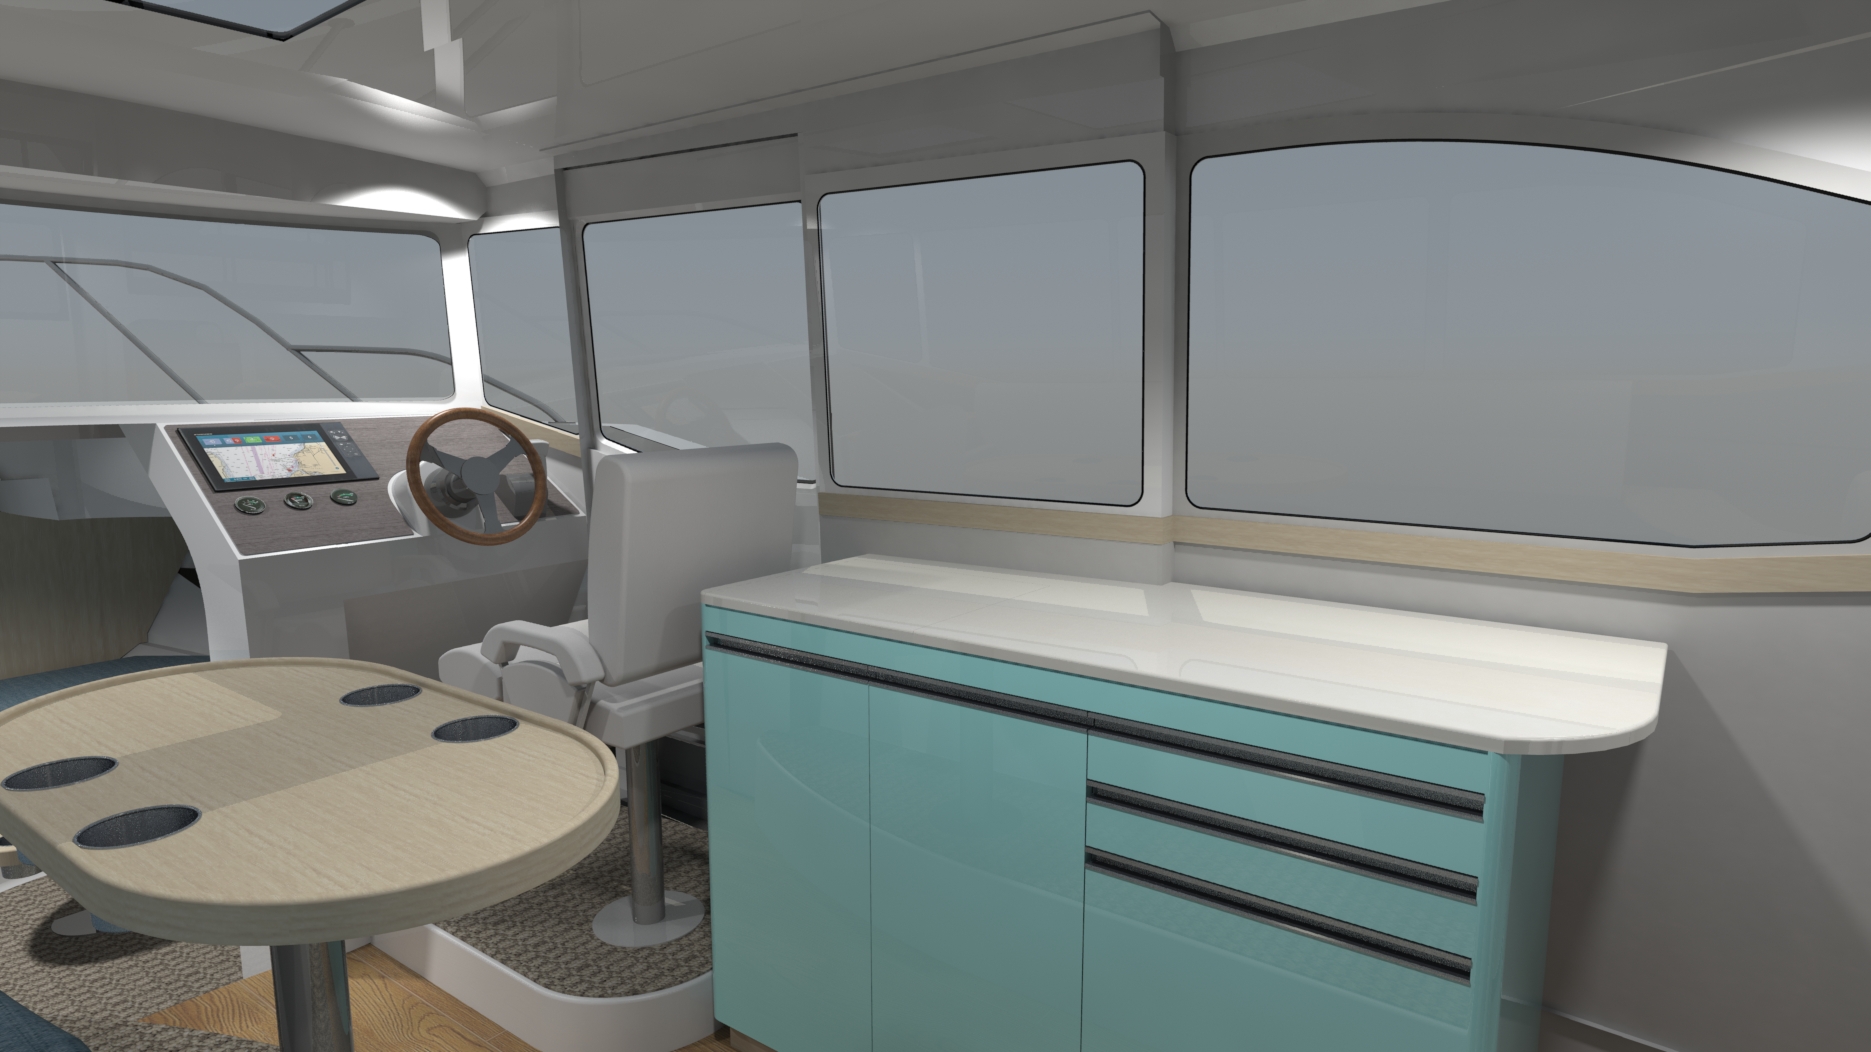 Galley counter and sliding door on starboard side of cabin